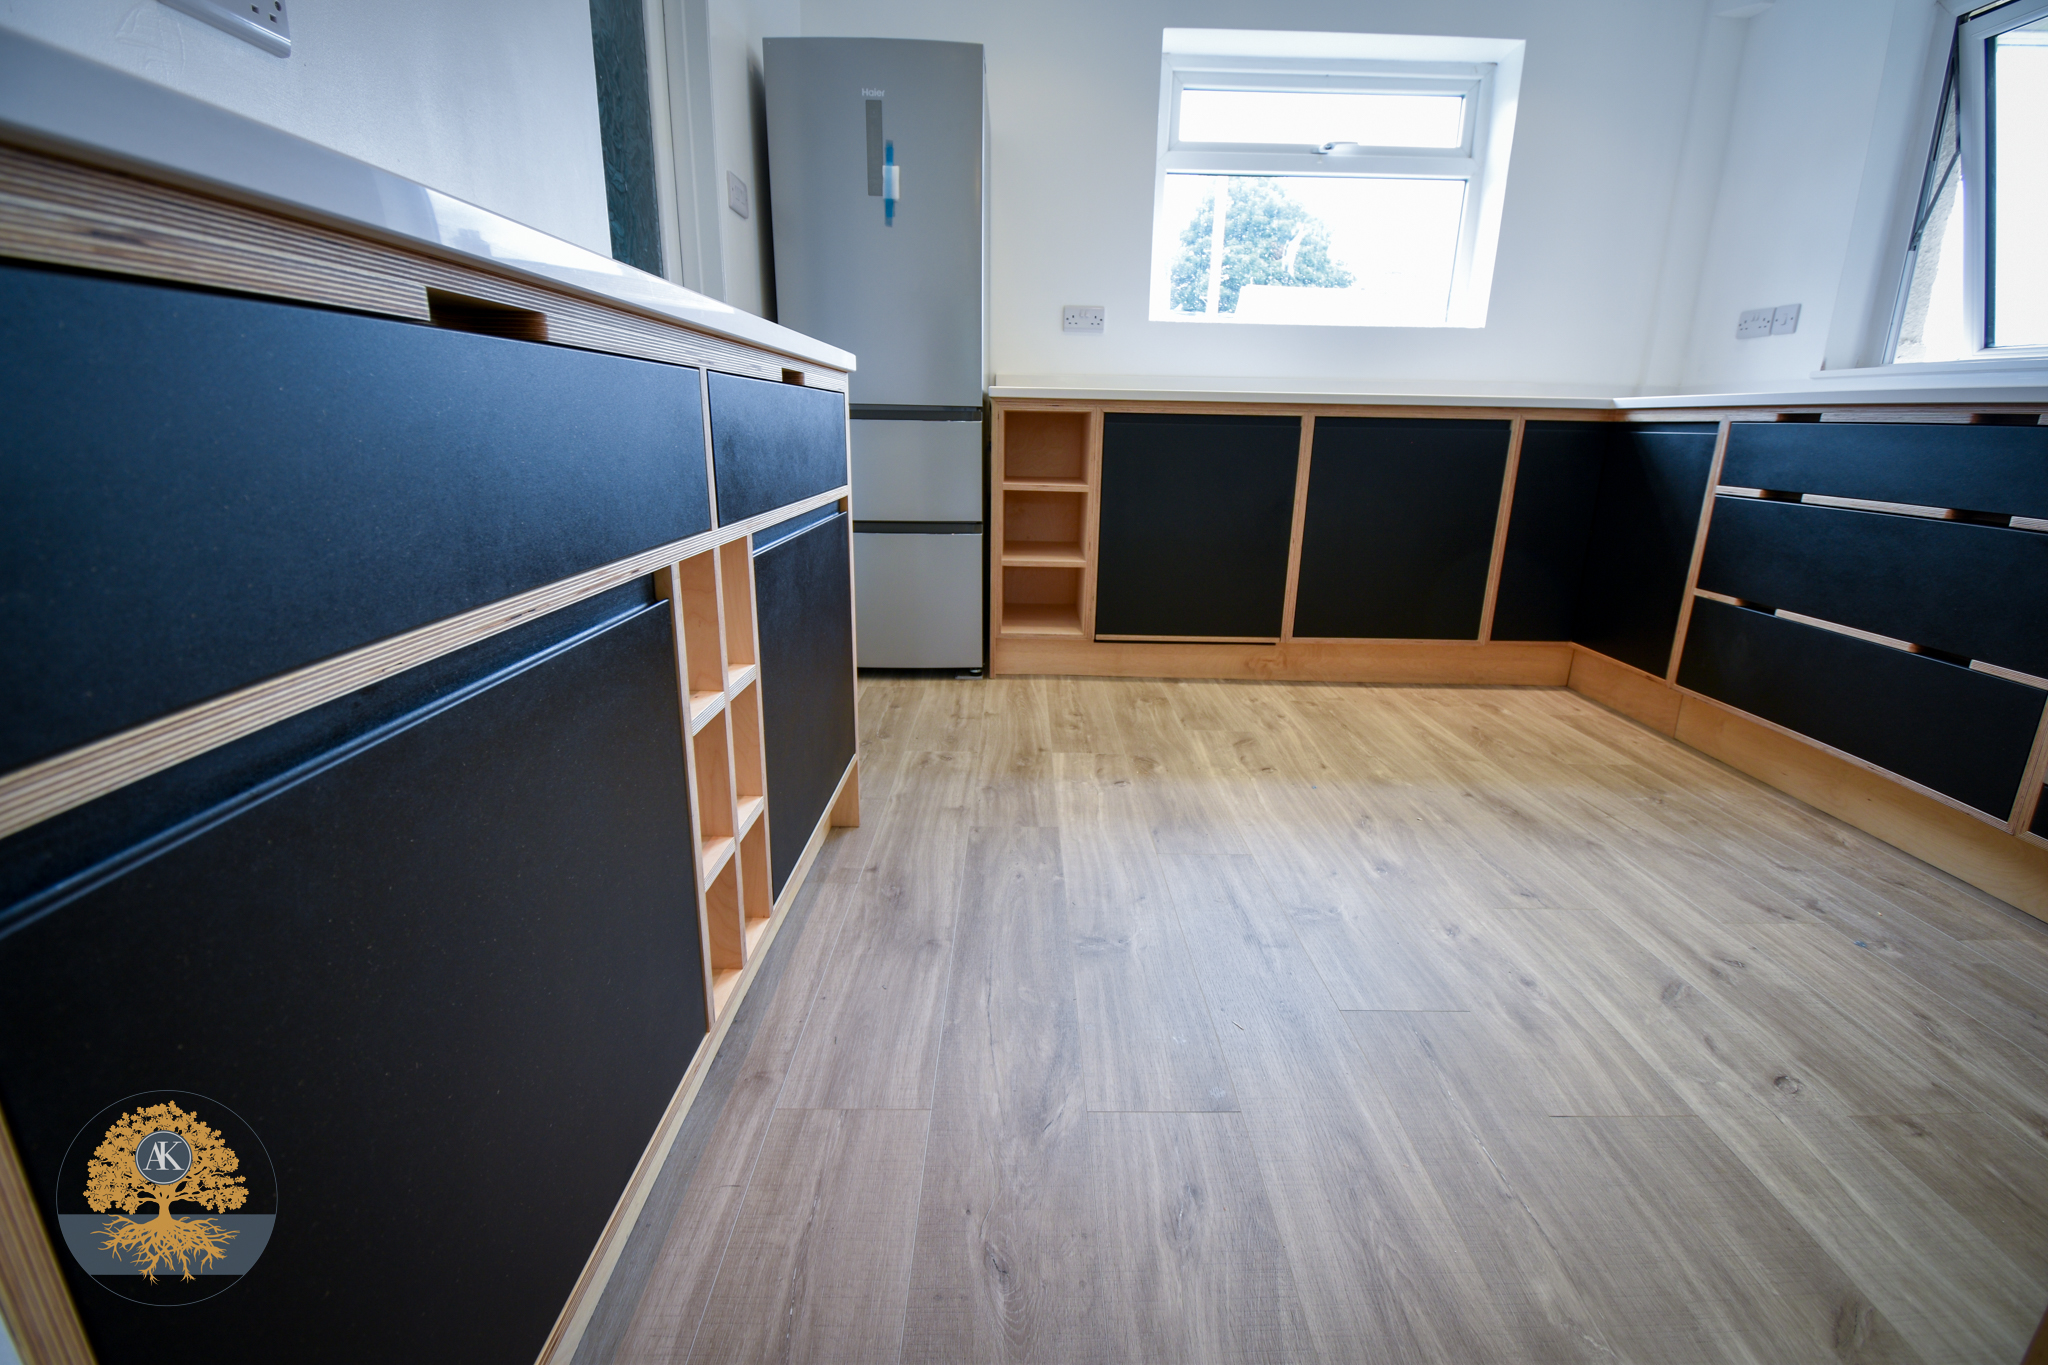 Birch Ply wood and Valcromat Kitchens designed and created Skipton Ilkley and Harrogate